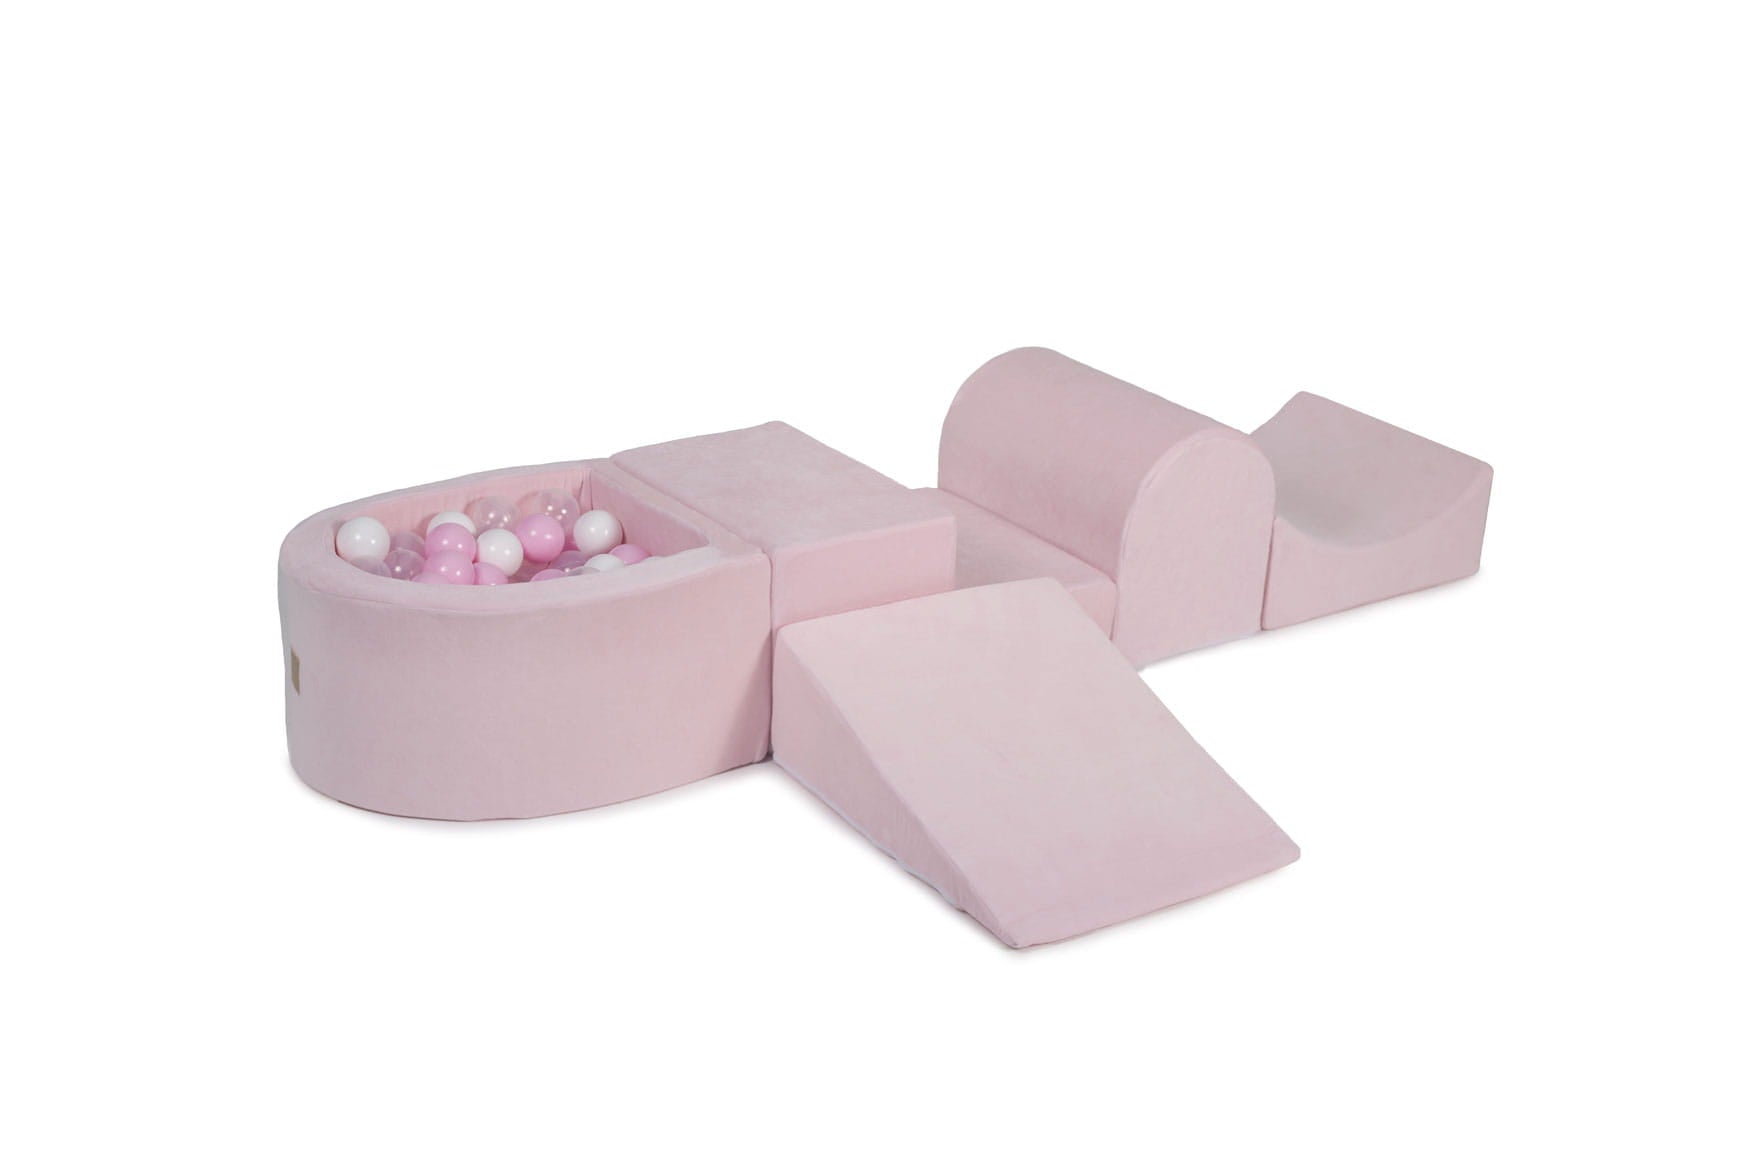 MeowBaby Luxury Pink Foam Soft Play with White